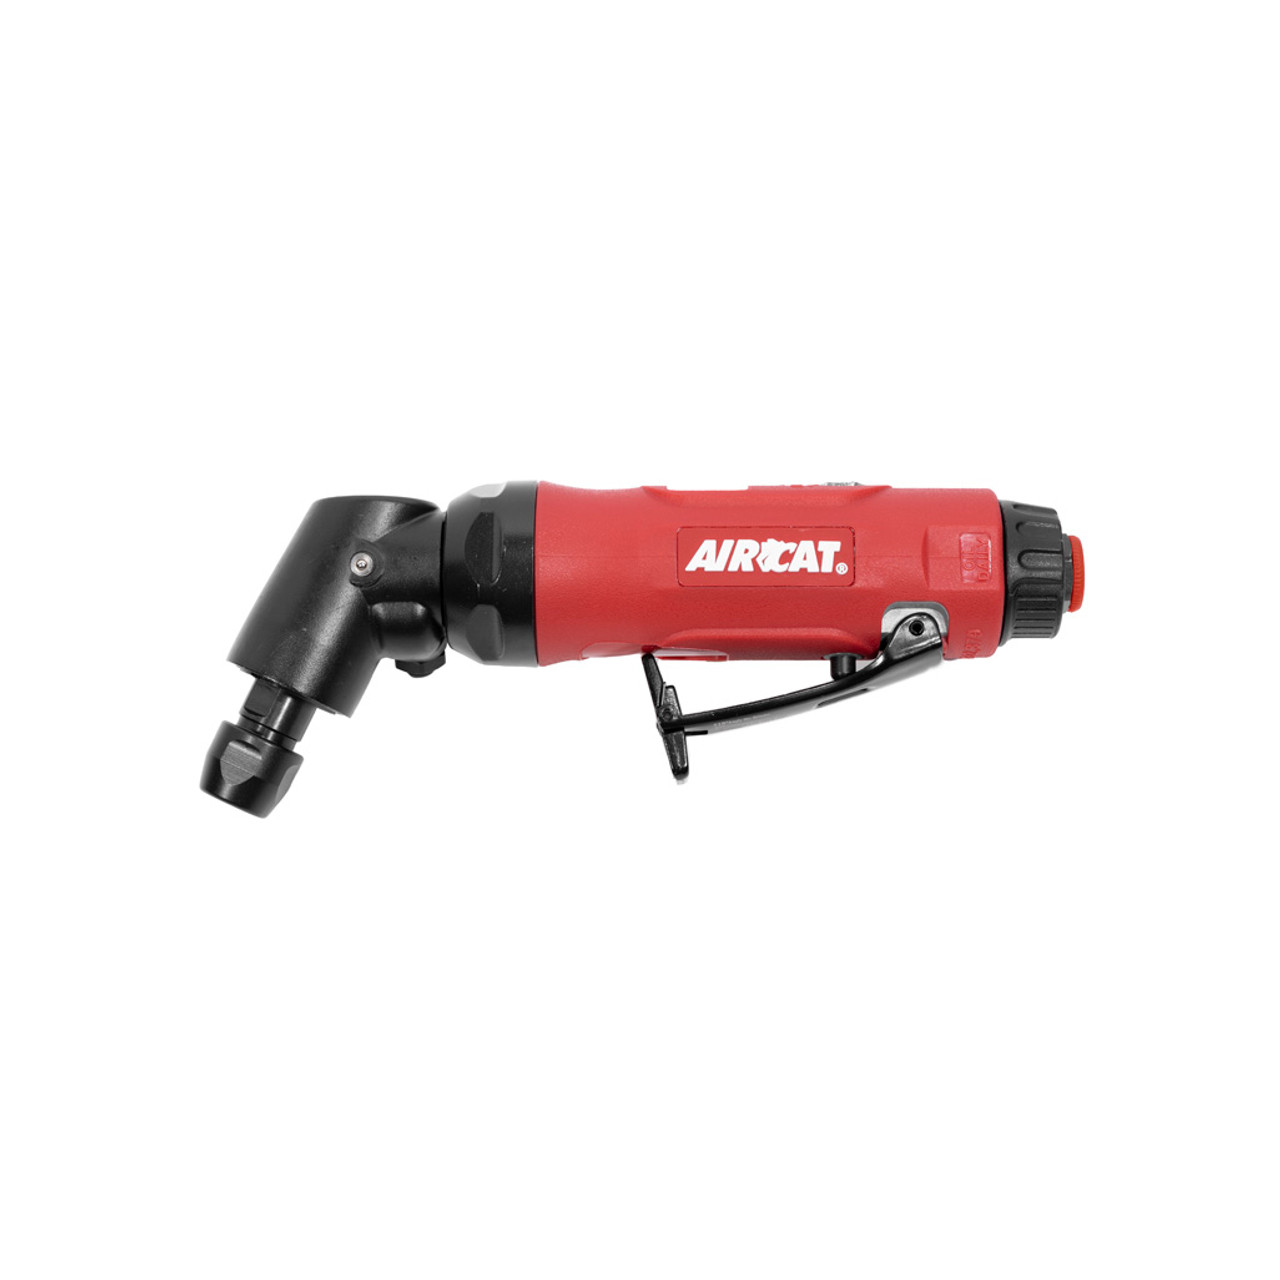 AIRCAT 6255 Professional Series Red Composite Angle Die Grinder With Angled Gear Mechanism by AirCat - 3